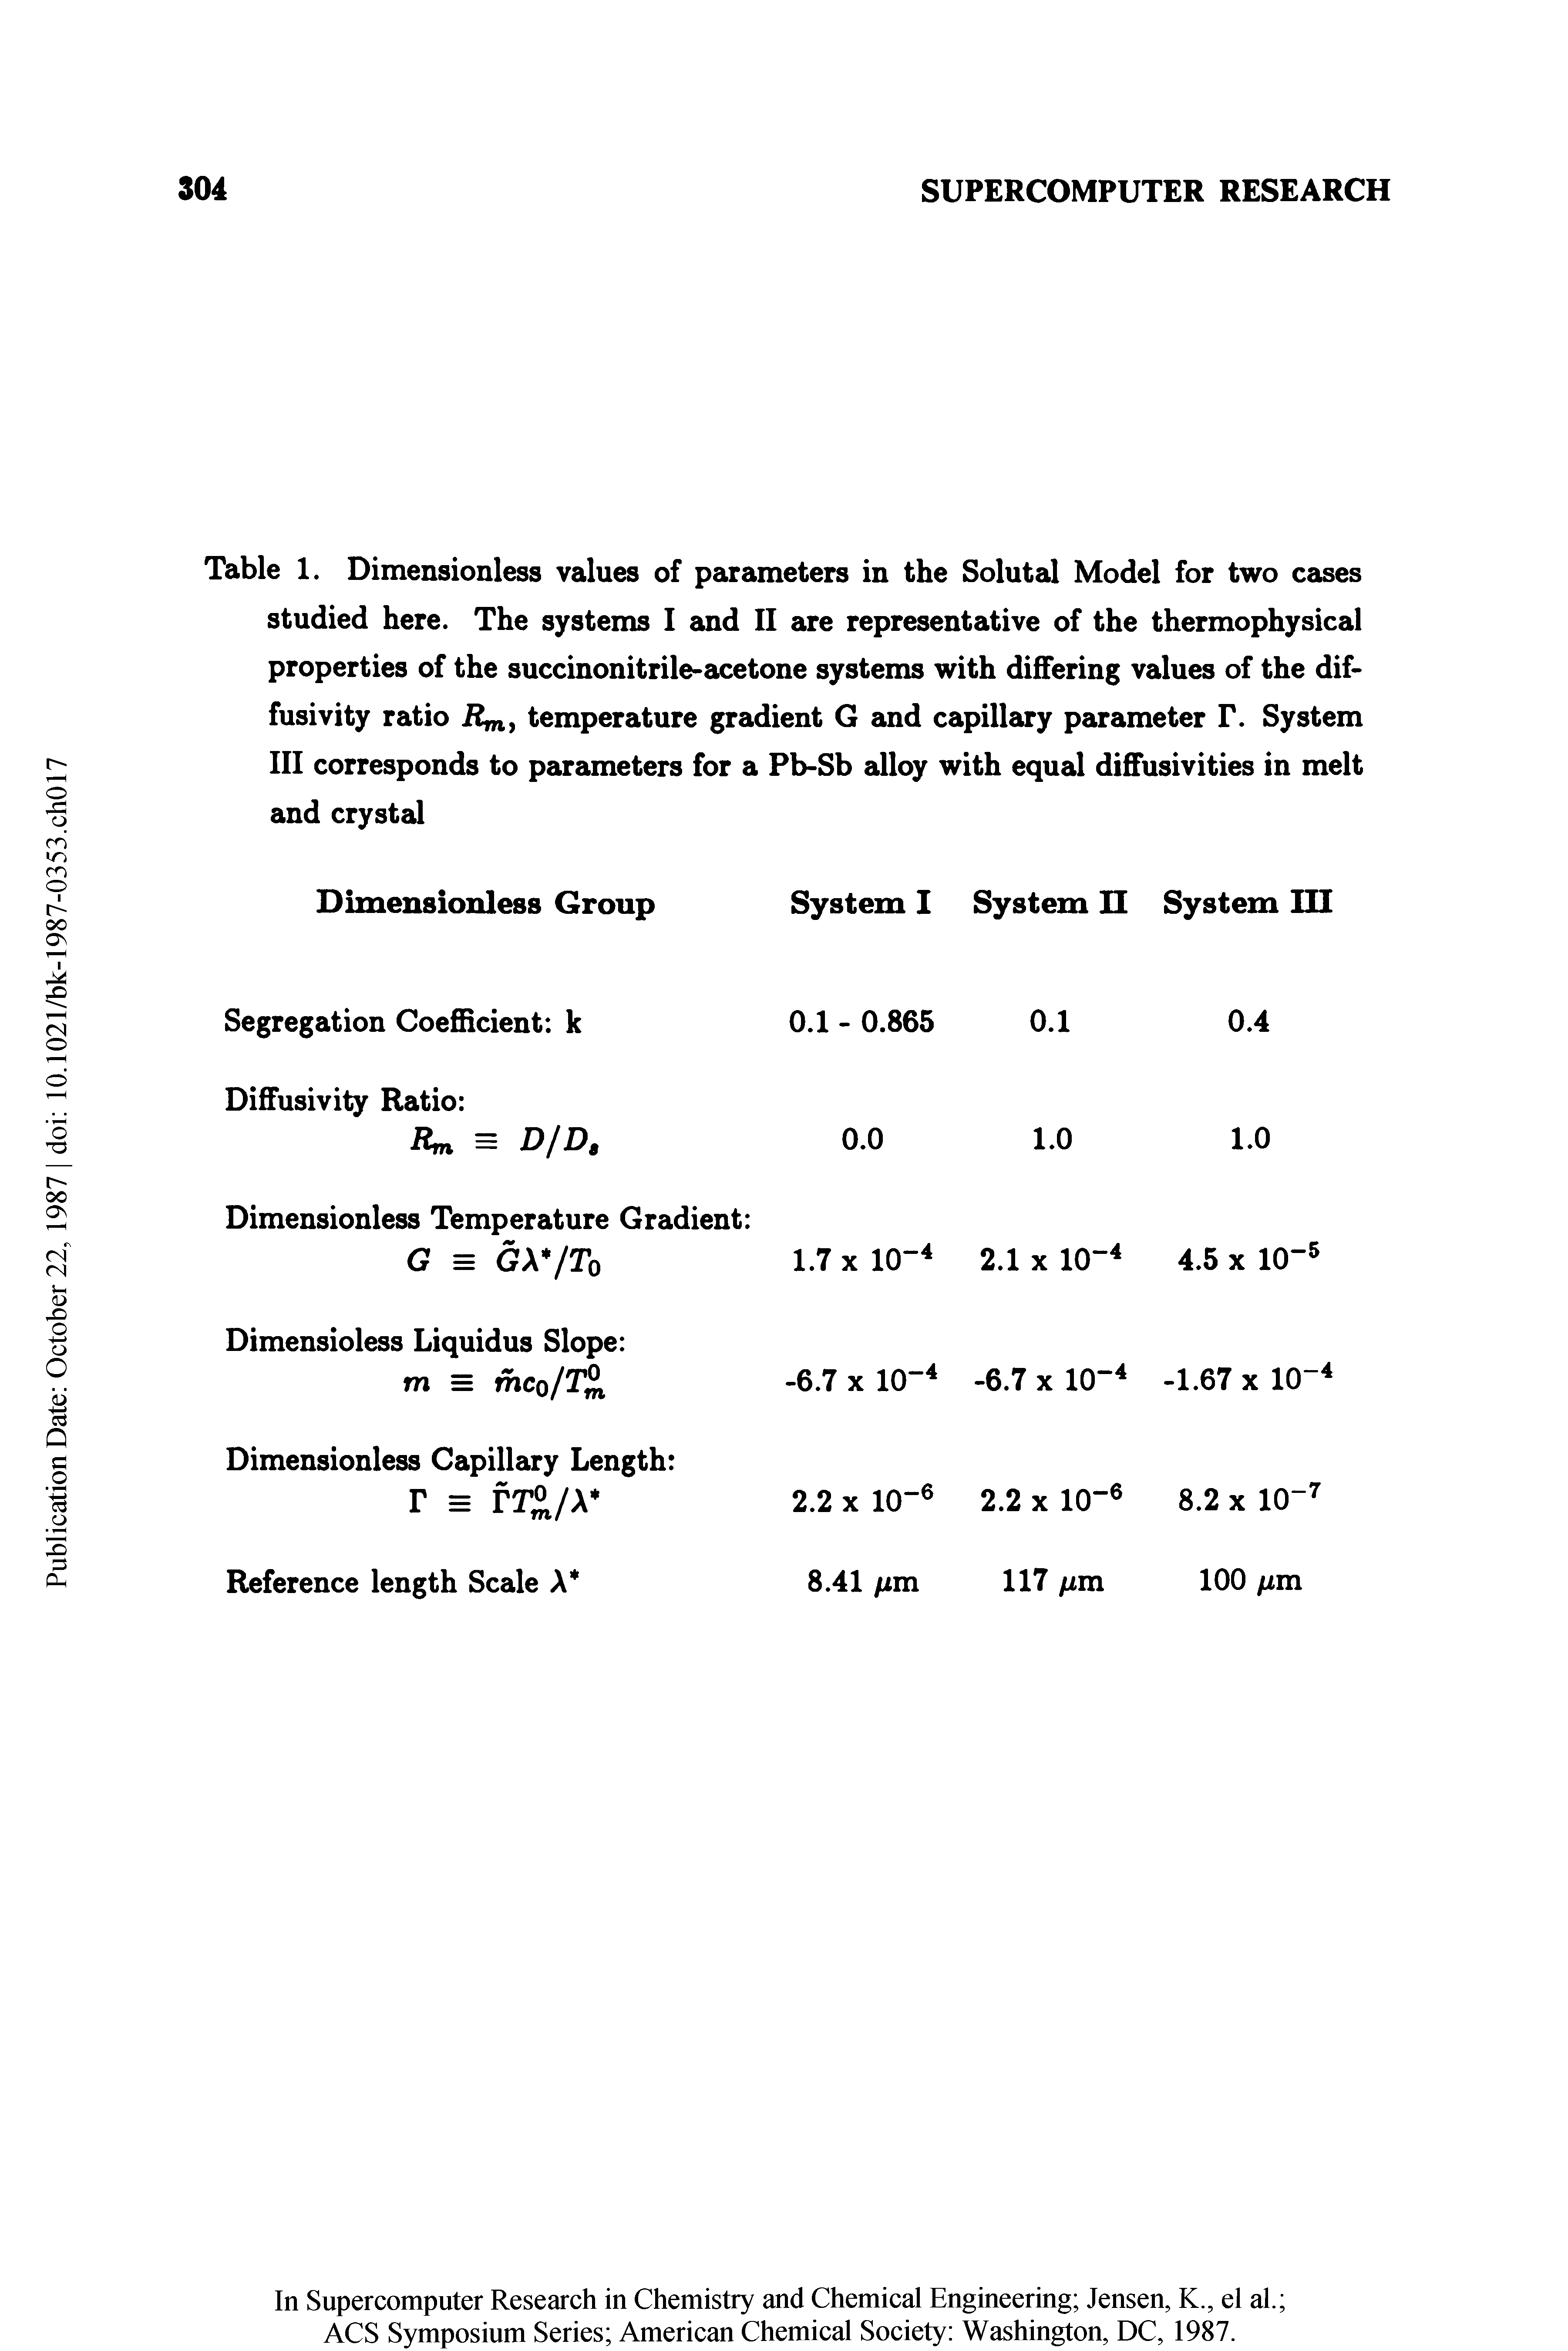 Table 1. Dimensionless values of parameters in the Solutal Model for two cases studied here. The systems I and II are representative of the thermophysical properties of the succinonitrile-acetone systems with differing values of the dif-fusivity ratio Rm, temperature gradient G and capillary parameter F. System III corresponds to parameters for a Pb-Sb alloy with equal diffusivities in melt and crystal...